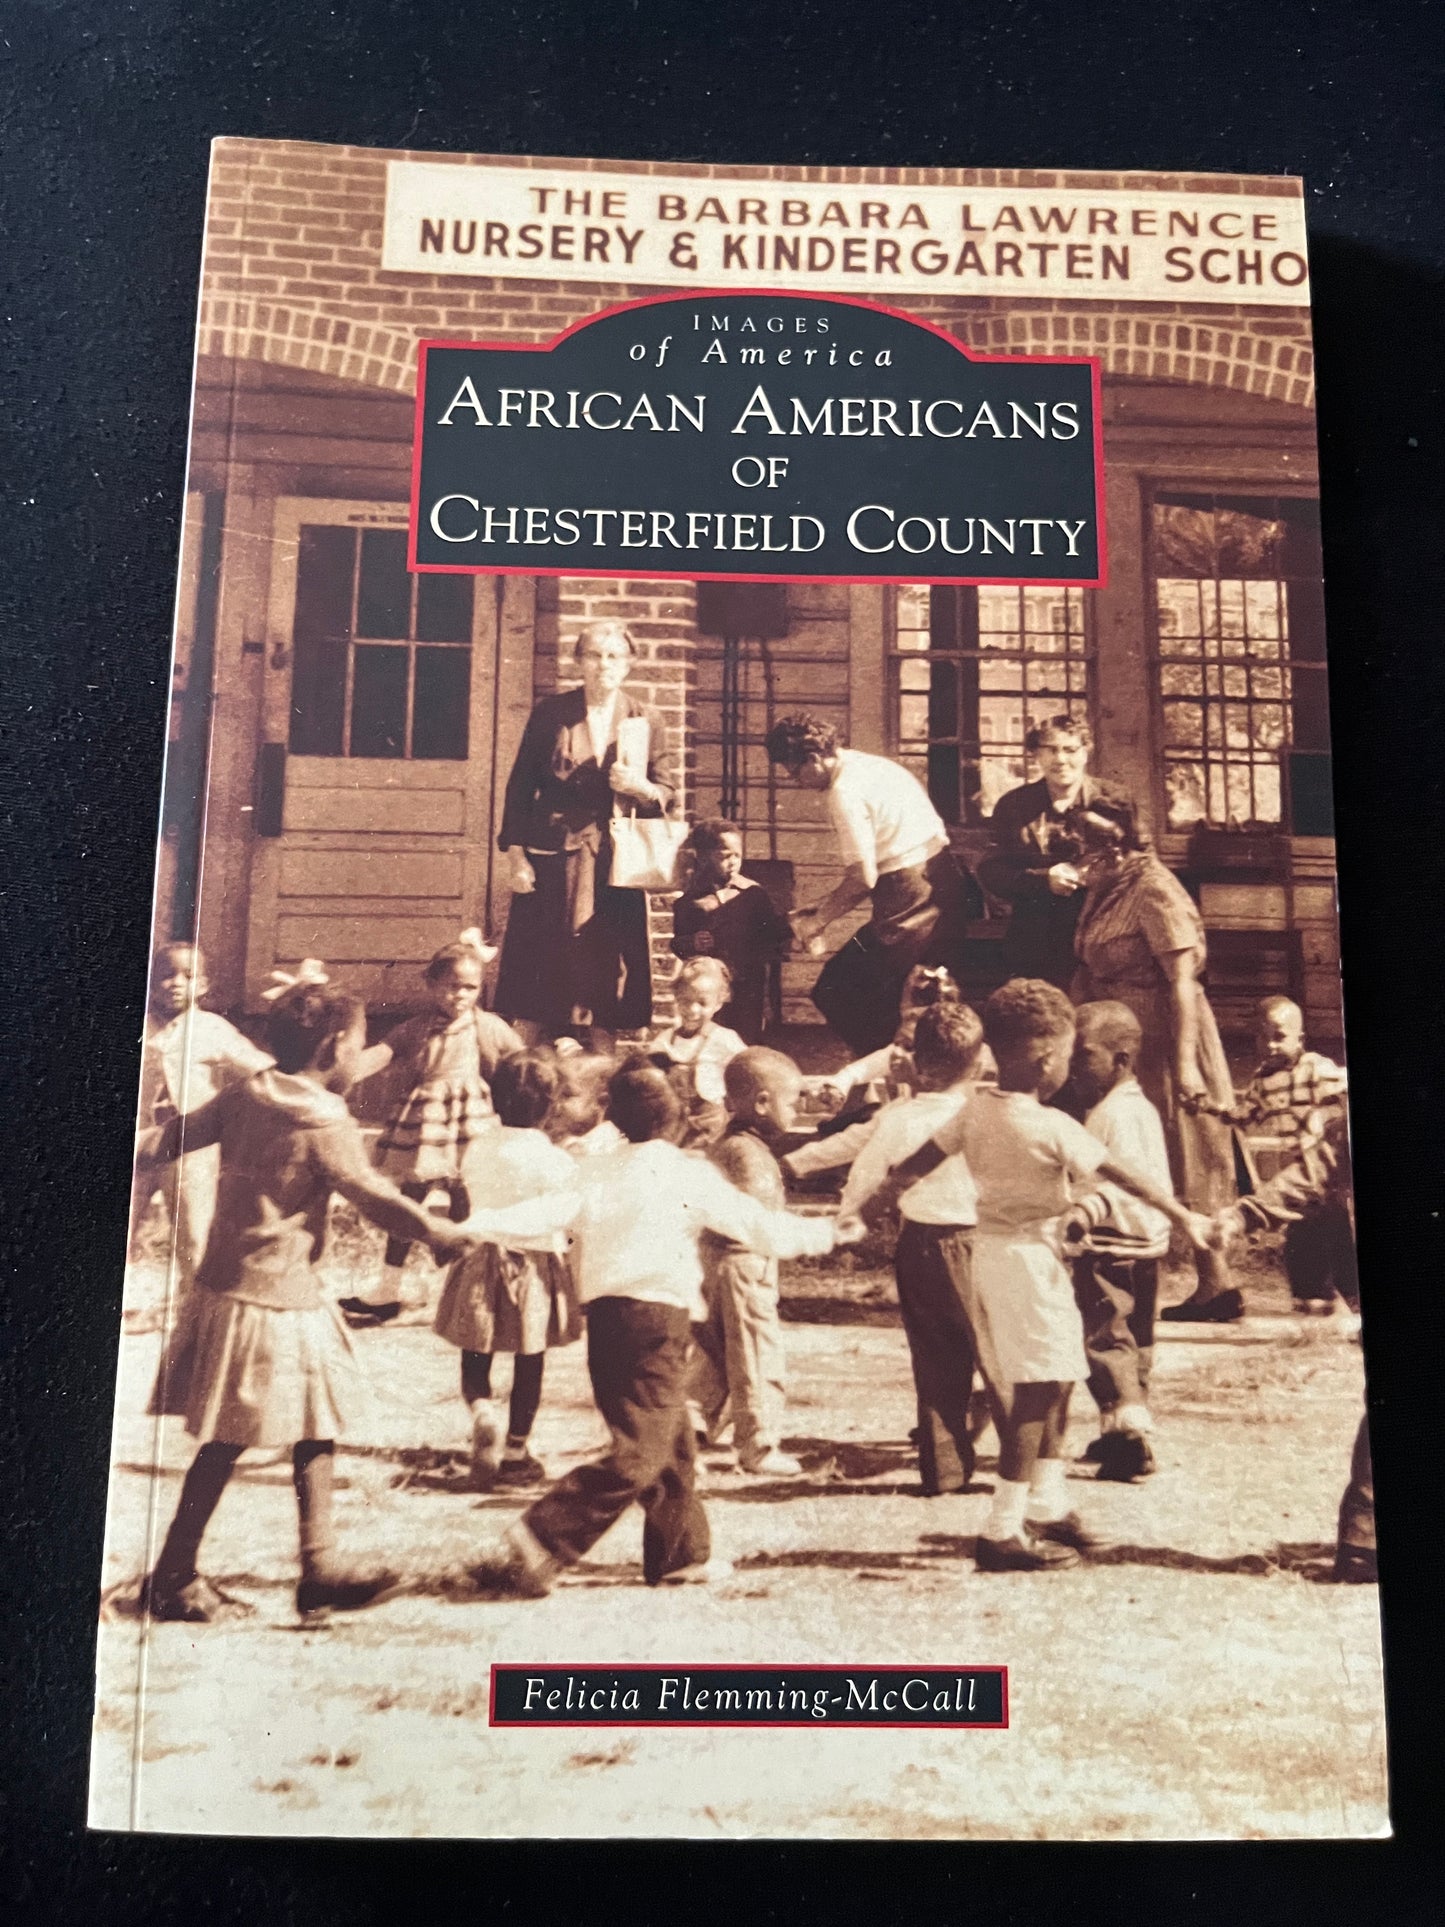 IMAGES OF AFRICAN AMERICA: African Americans of Chesterfield County by Felicia Flemming-McCall